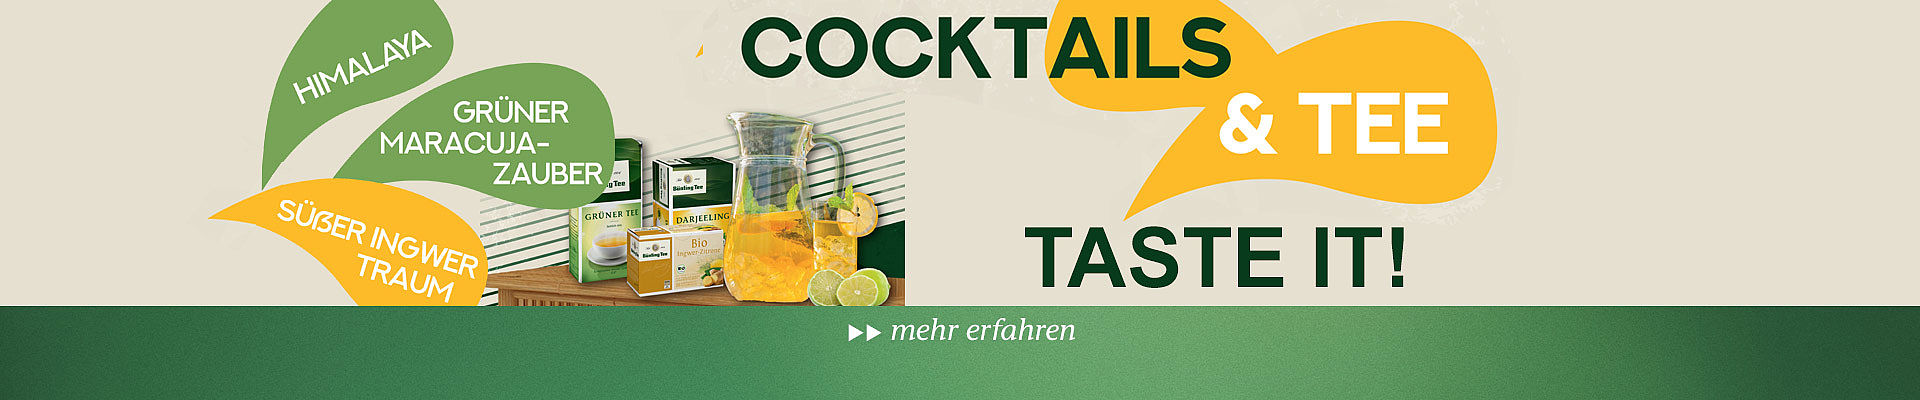 Festival-Tee-Cocktails